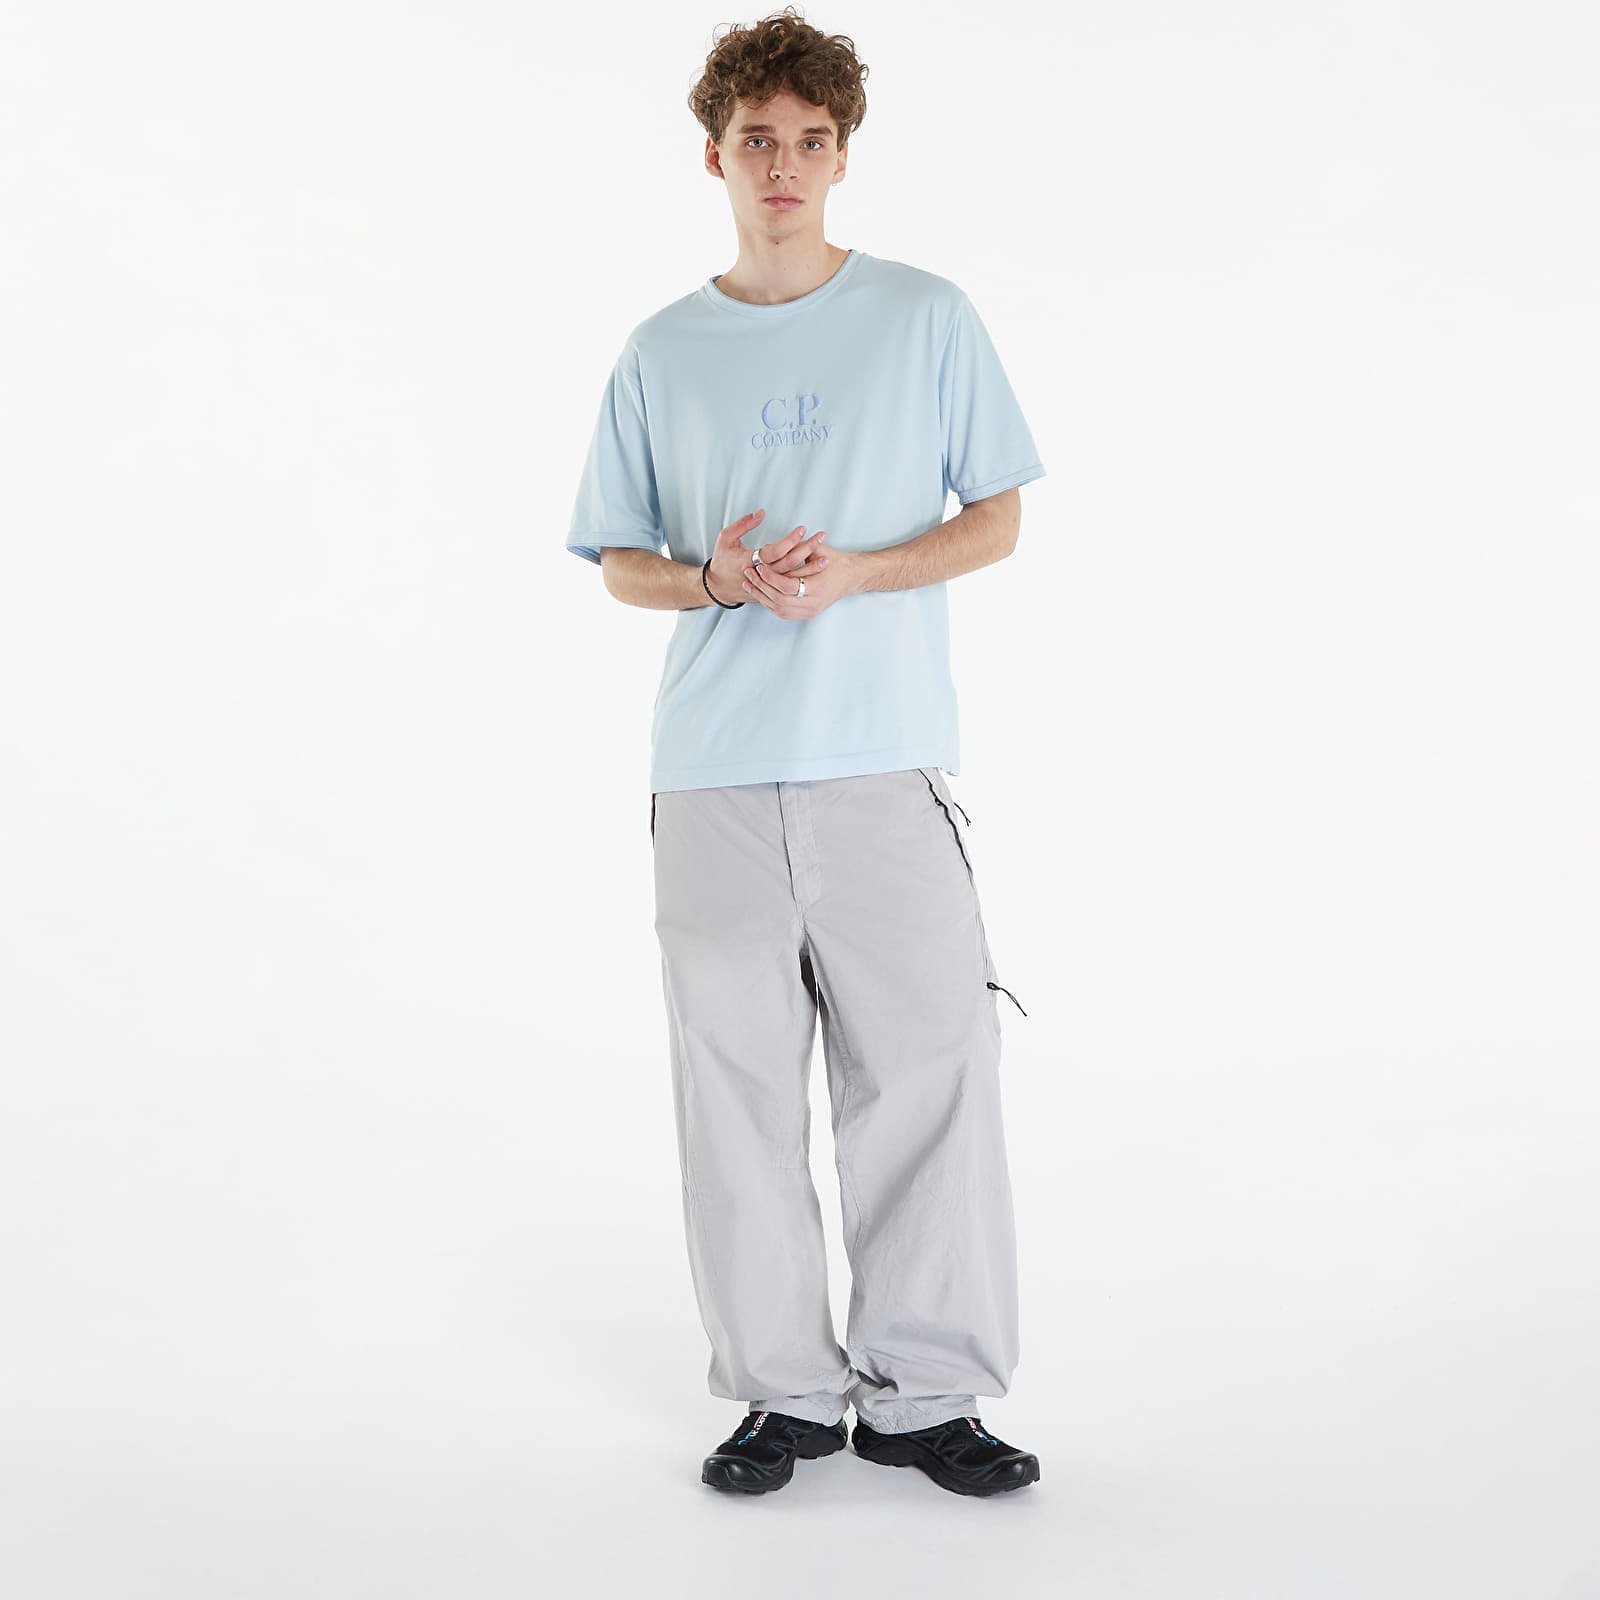 Cargo Pants Drizzle Grey